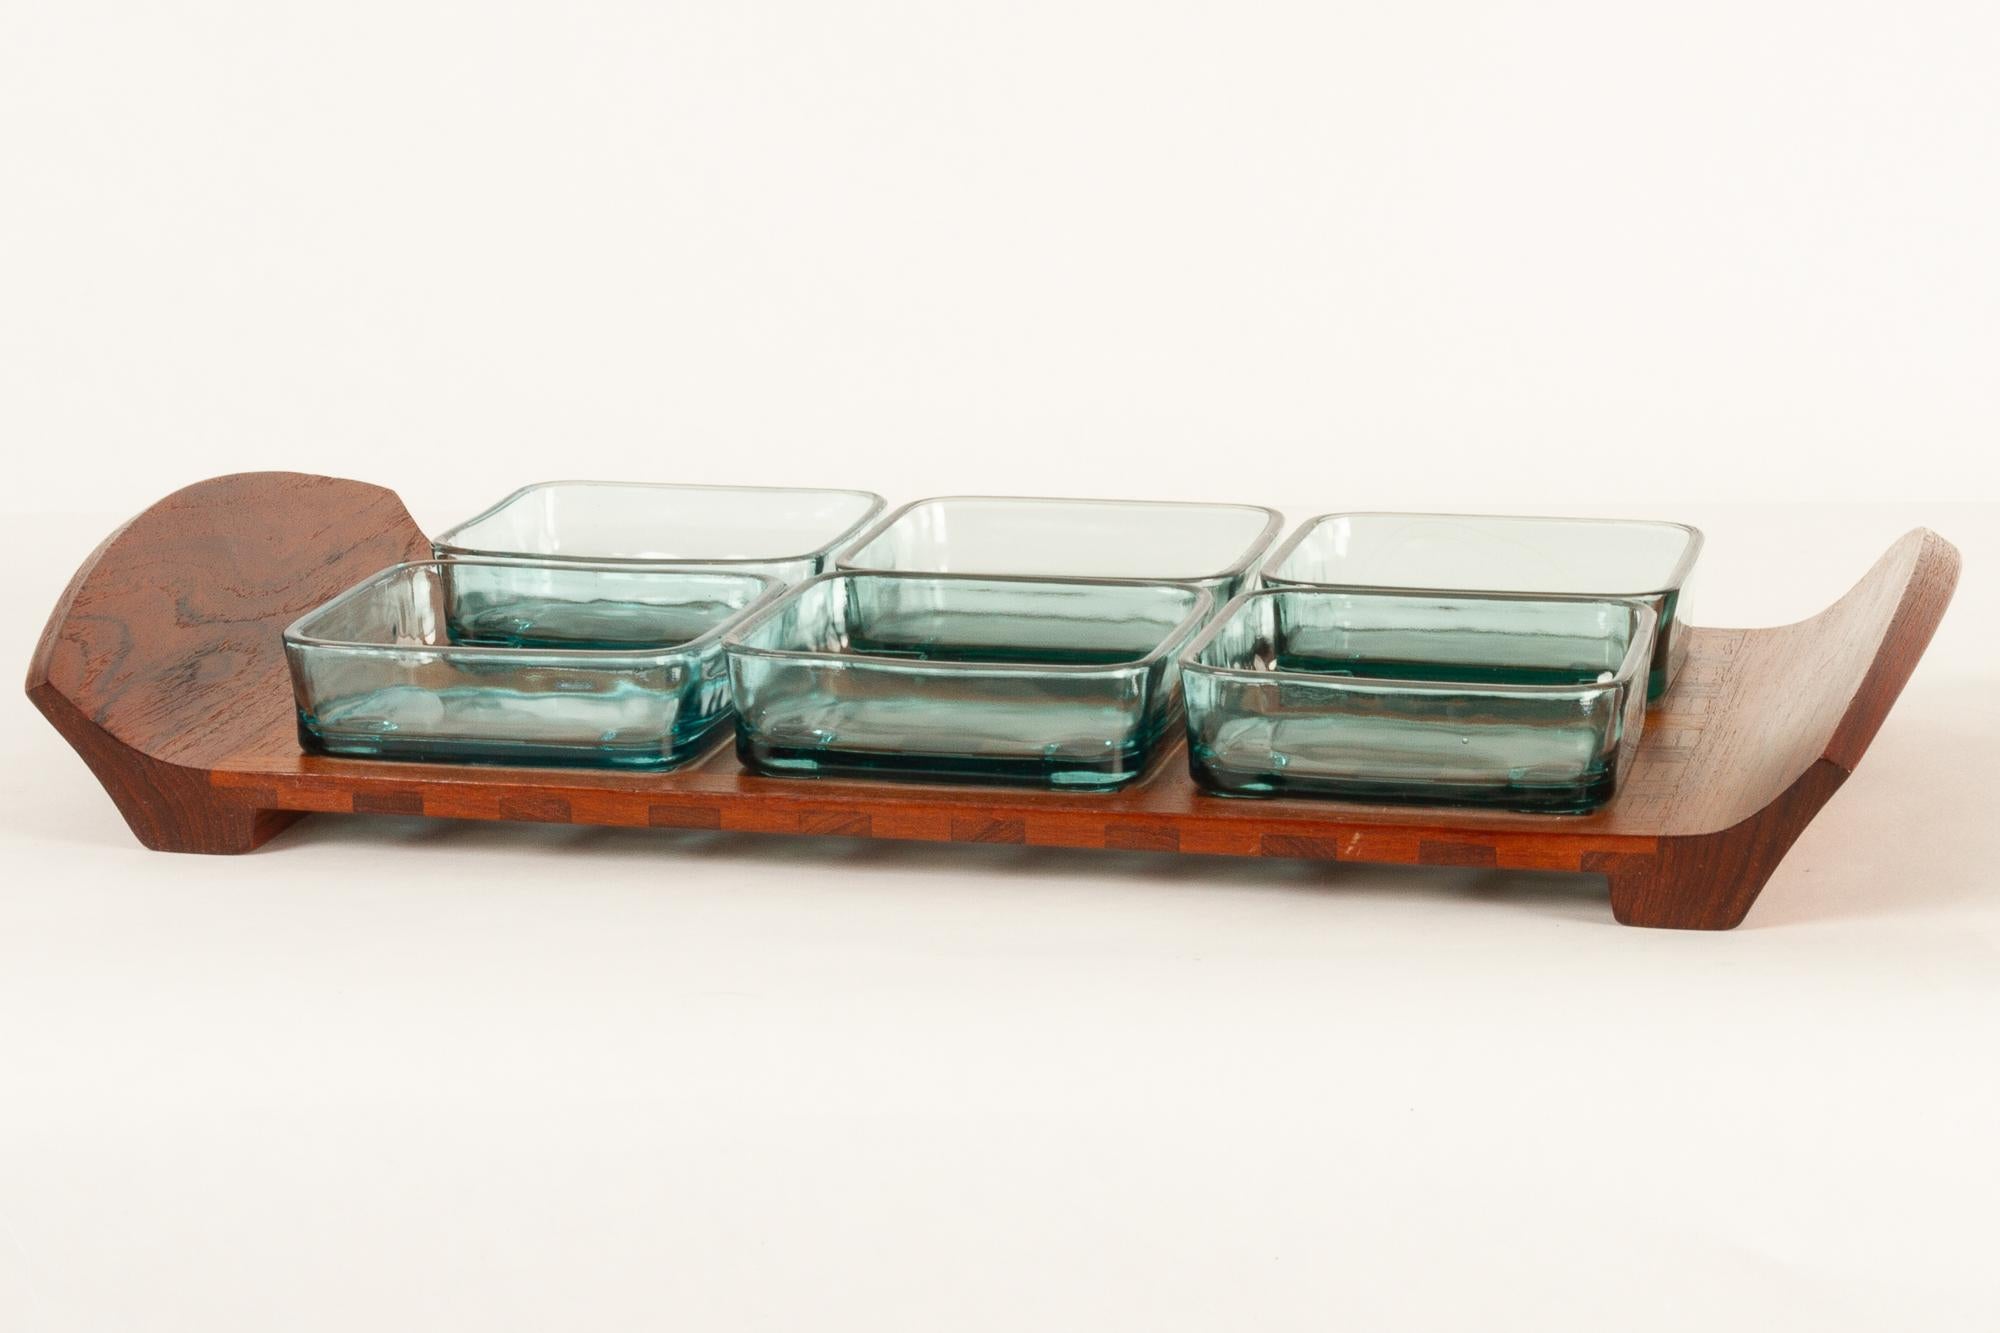 Vintage Danish teak tray with glass bowls by Jens Harald Quistgaard for IHQ Dansk Designs, 1960s.
Serving tray in solid teak with six green glass dishes. Each dish has feet that fits into the lattice on the tray. Measures: Length 46 cm. Marked JHQ